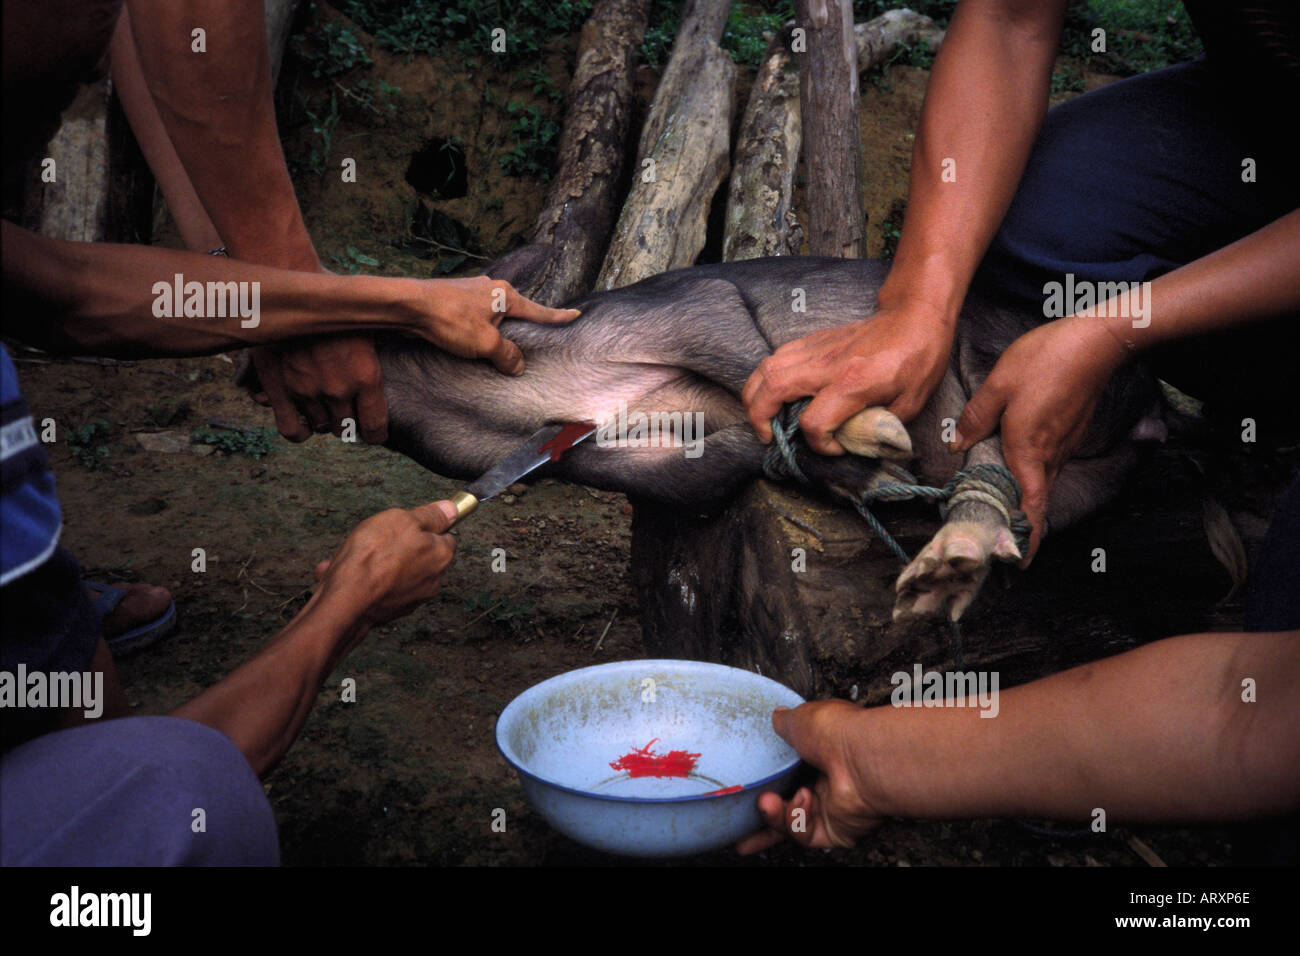 Slaughtering of a pig as a part of Laotian funeral ceremony near Vang Vieng in Laos 2004 Stock Photo